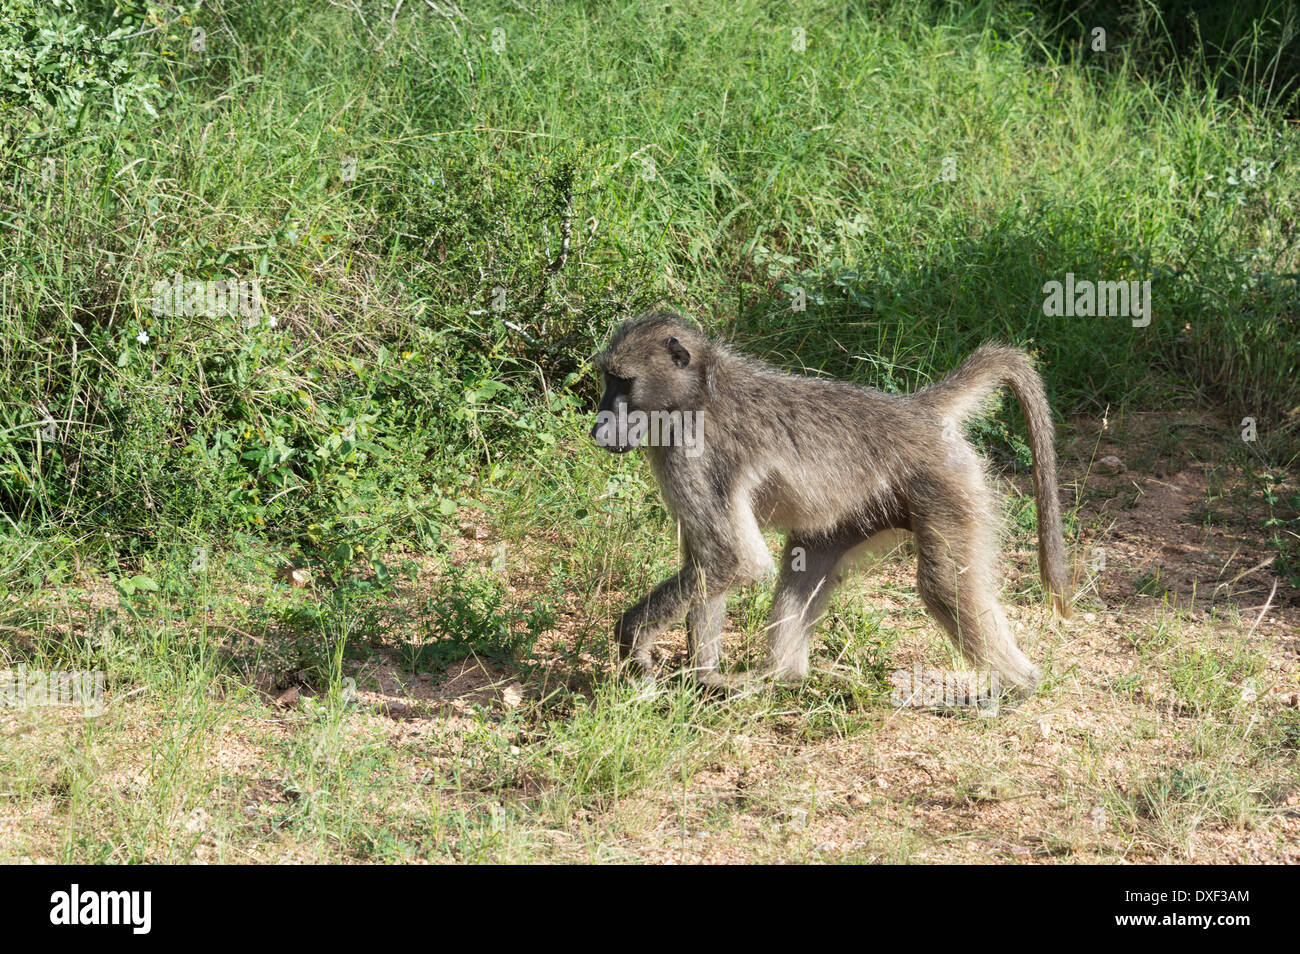 baboon monkey in kruger park south africa Stock Photo